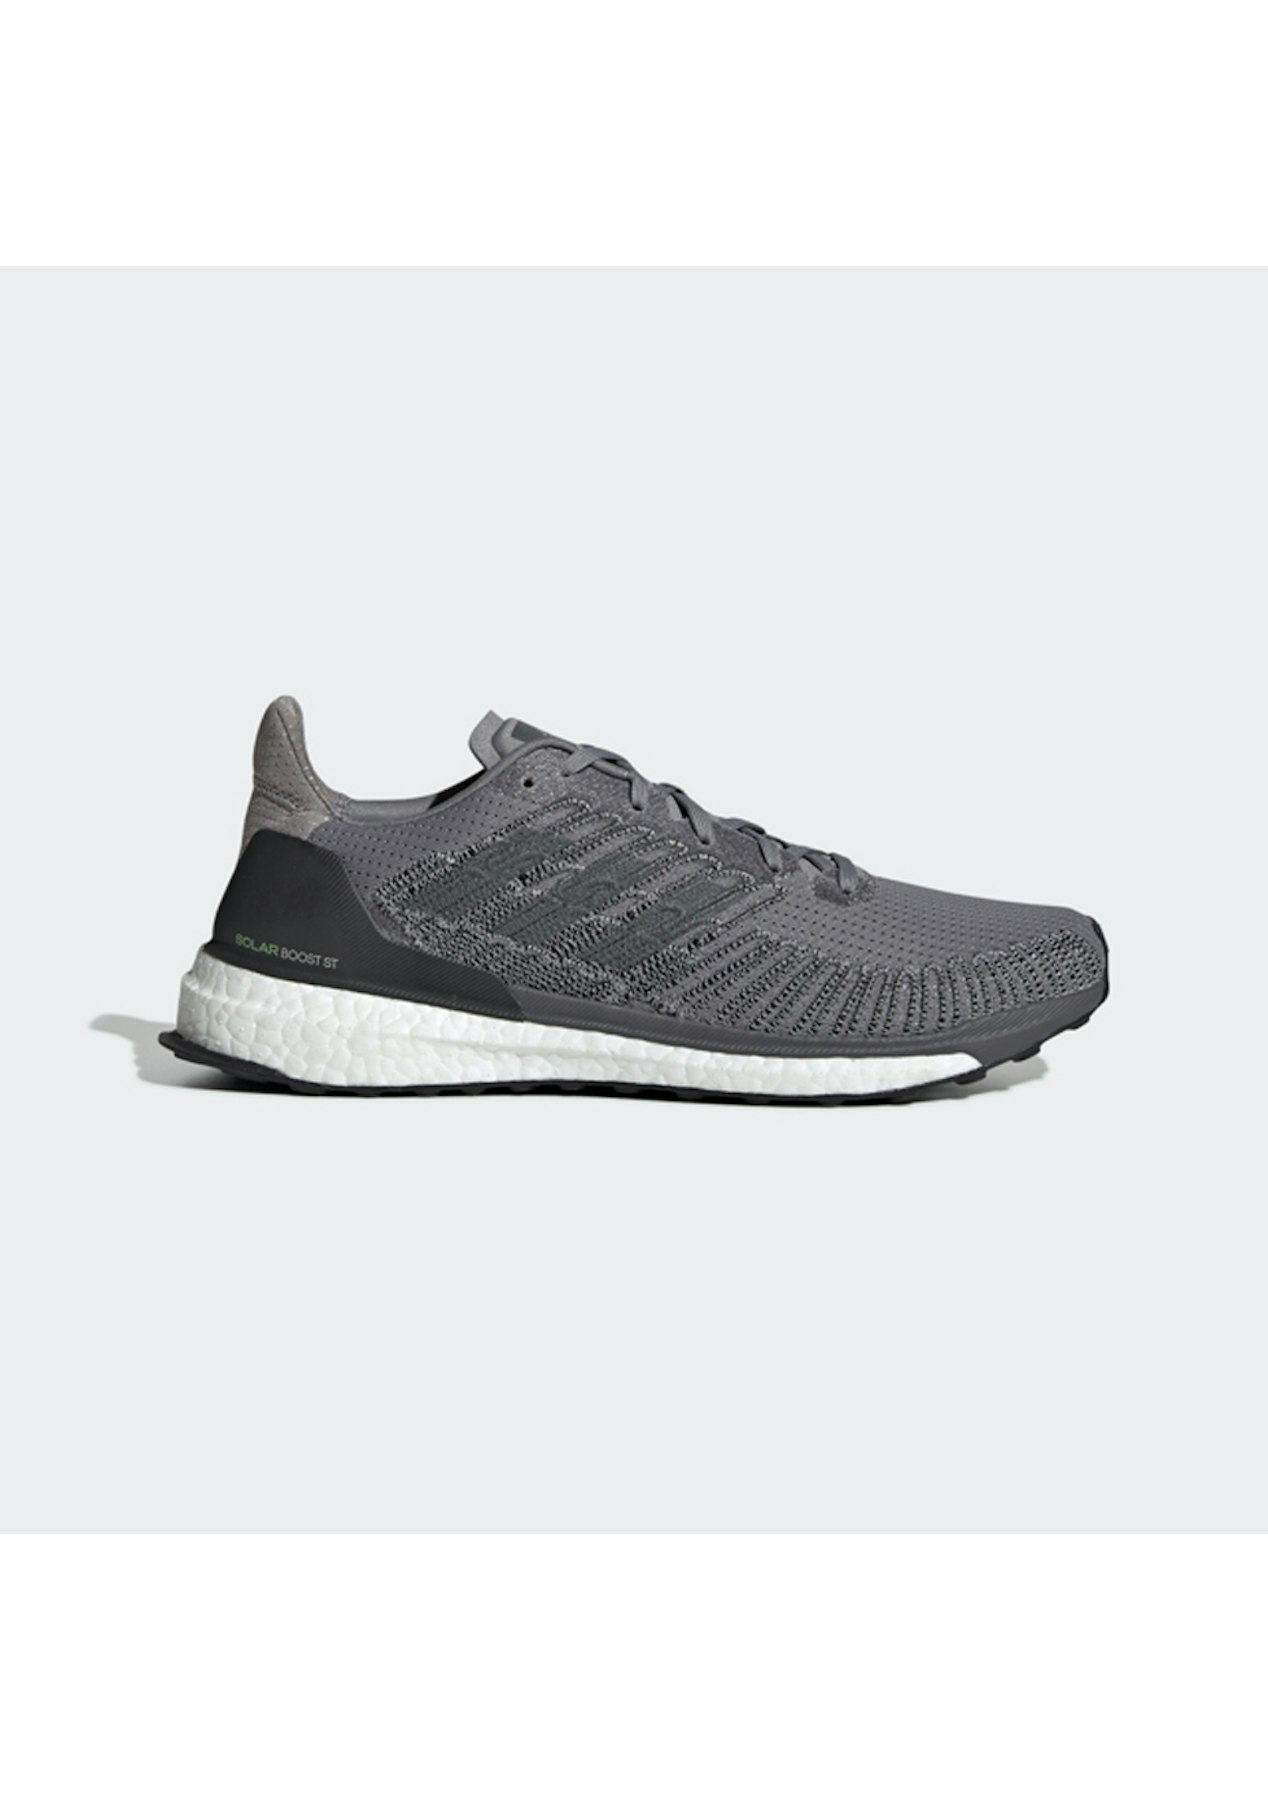 Darling channel Orbit Adidas - Mens Solarboost St 19 Shoes - Grey Three / Grey Five / Solar  Yellow - Onceit